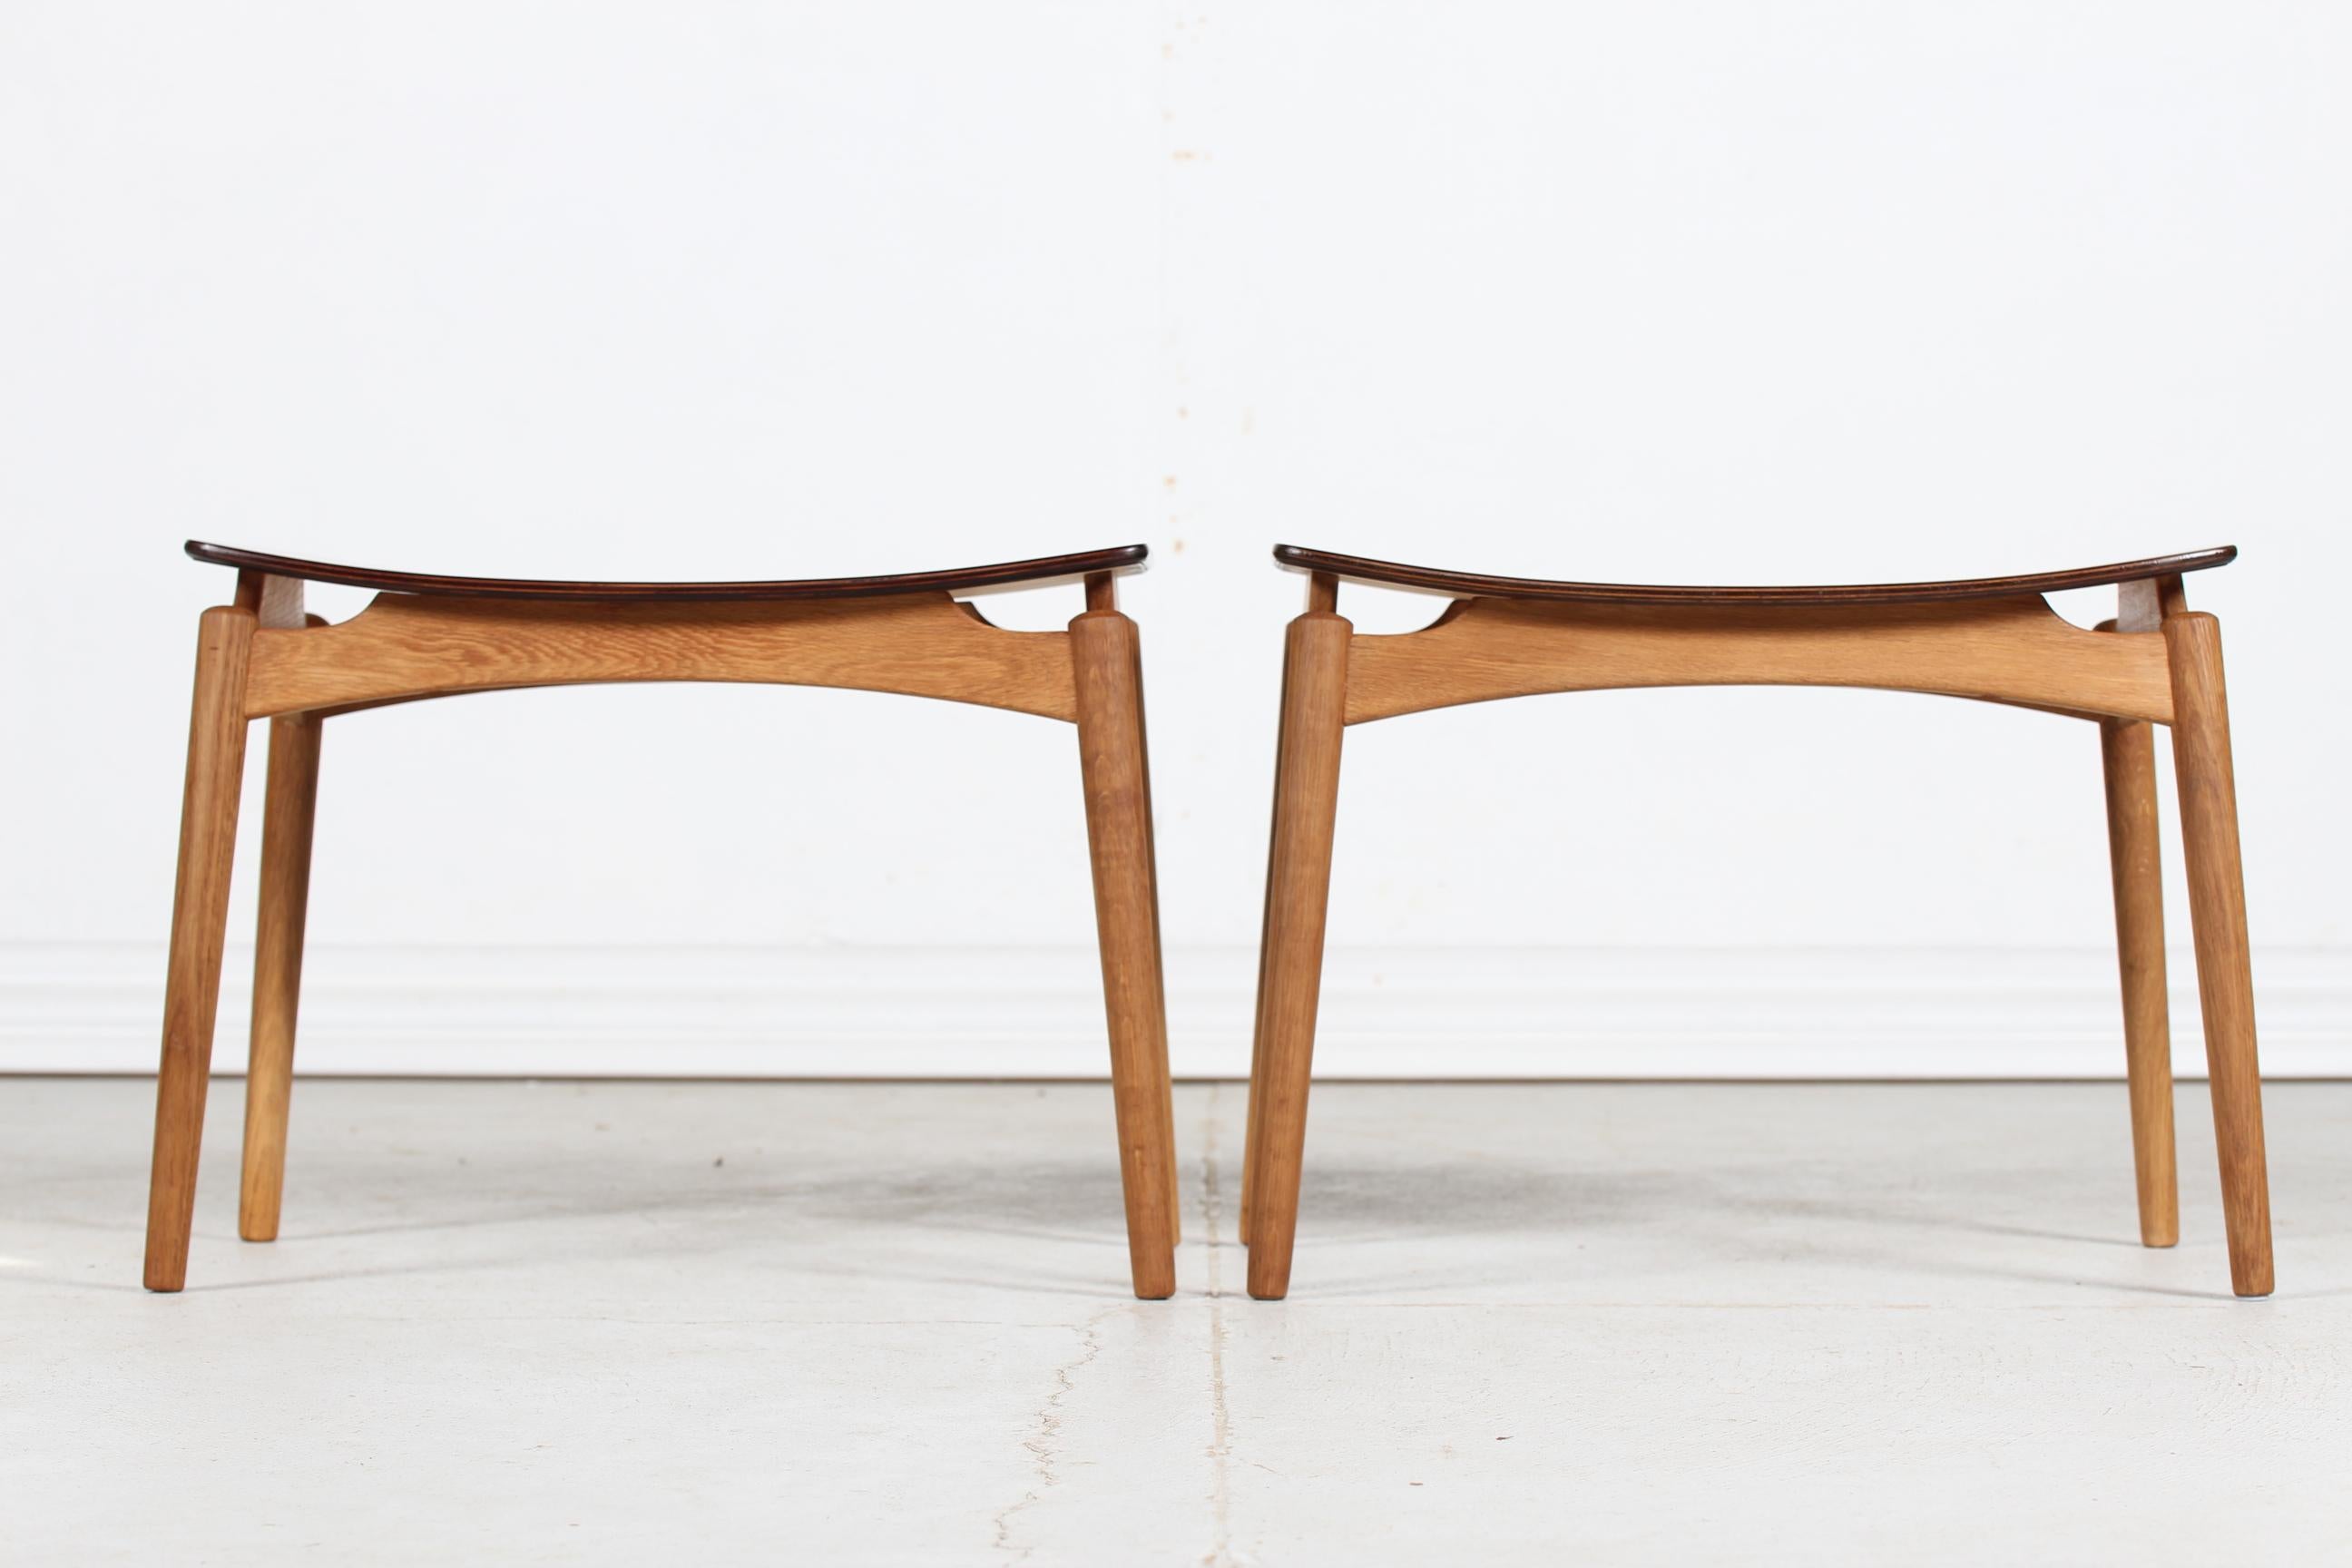 A pair of Danish Modern stools with floating seats manufactured by Sigfrid Omann made at Ølholm Møbelfabrik, Denmark in the 1960s.

The seats are made of steam bend teak veneer and the frames are of solid oak.
An elegant and high quality example